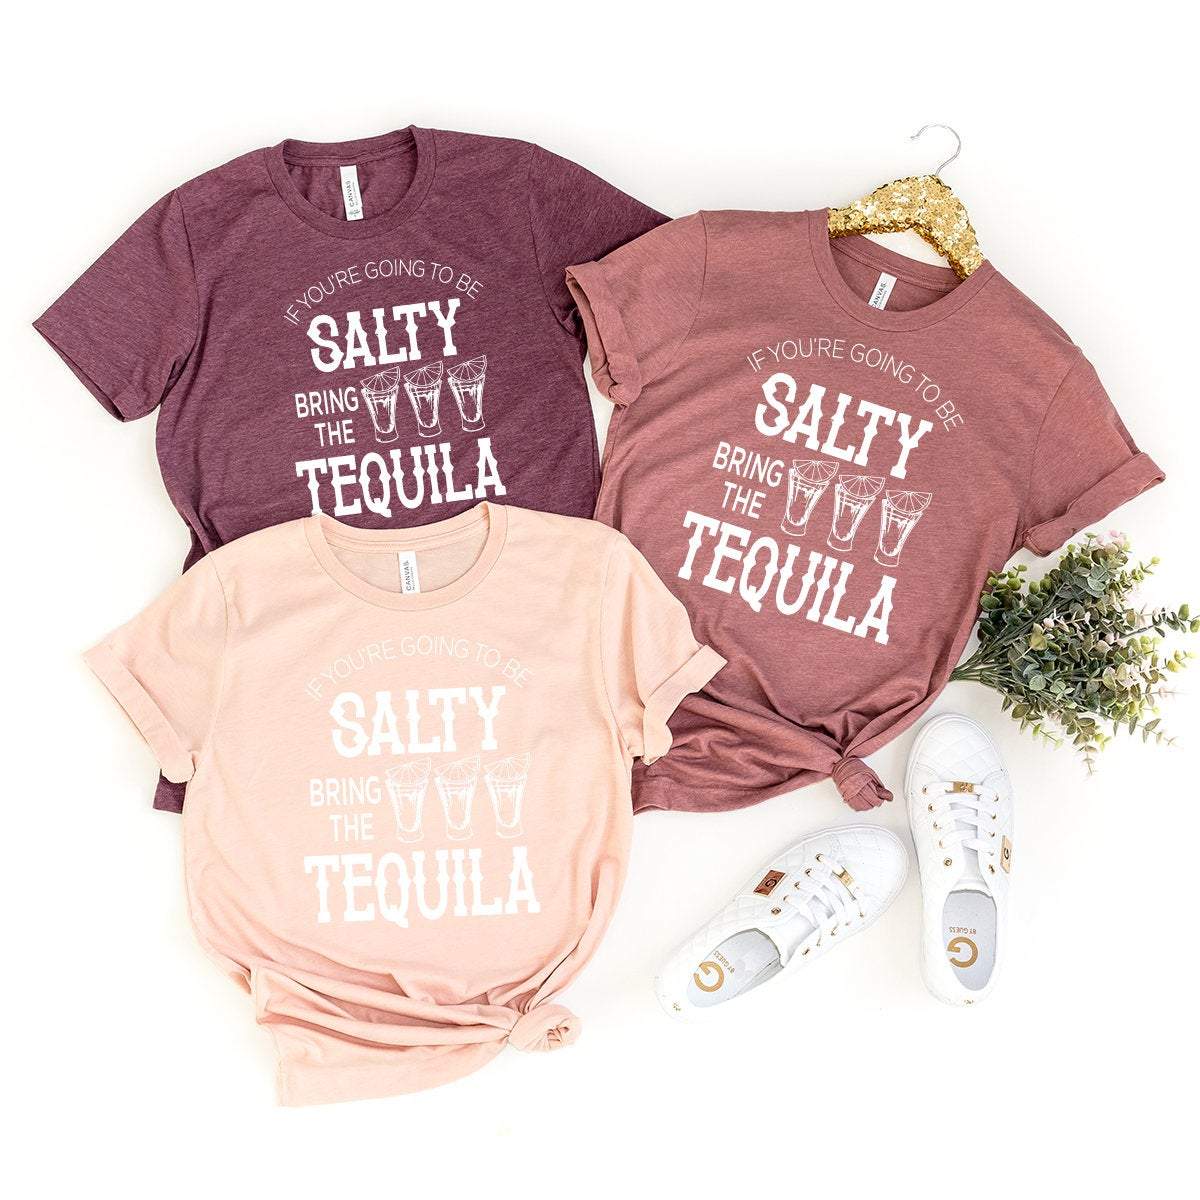 Tequila Shirt, Drinking Shirts, Drinking Friends Gift, Funny Drinking Shirts, If You Are Going To Be Salty Bring The Tequila Shirt, Party - Fastdeliverytees.com